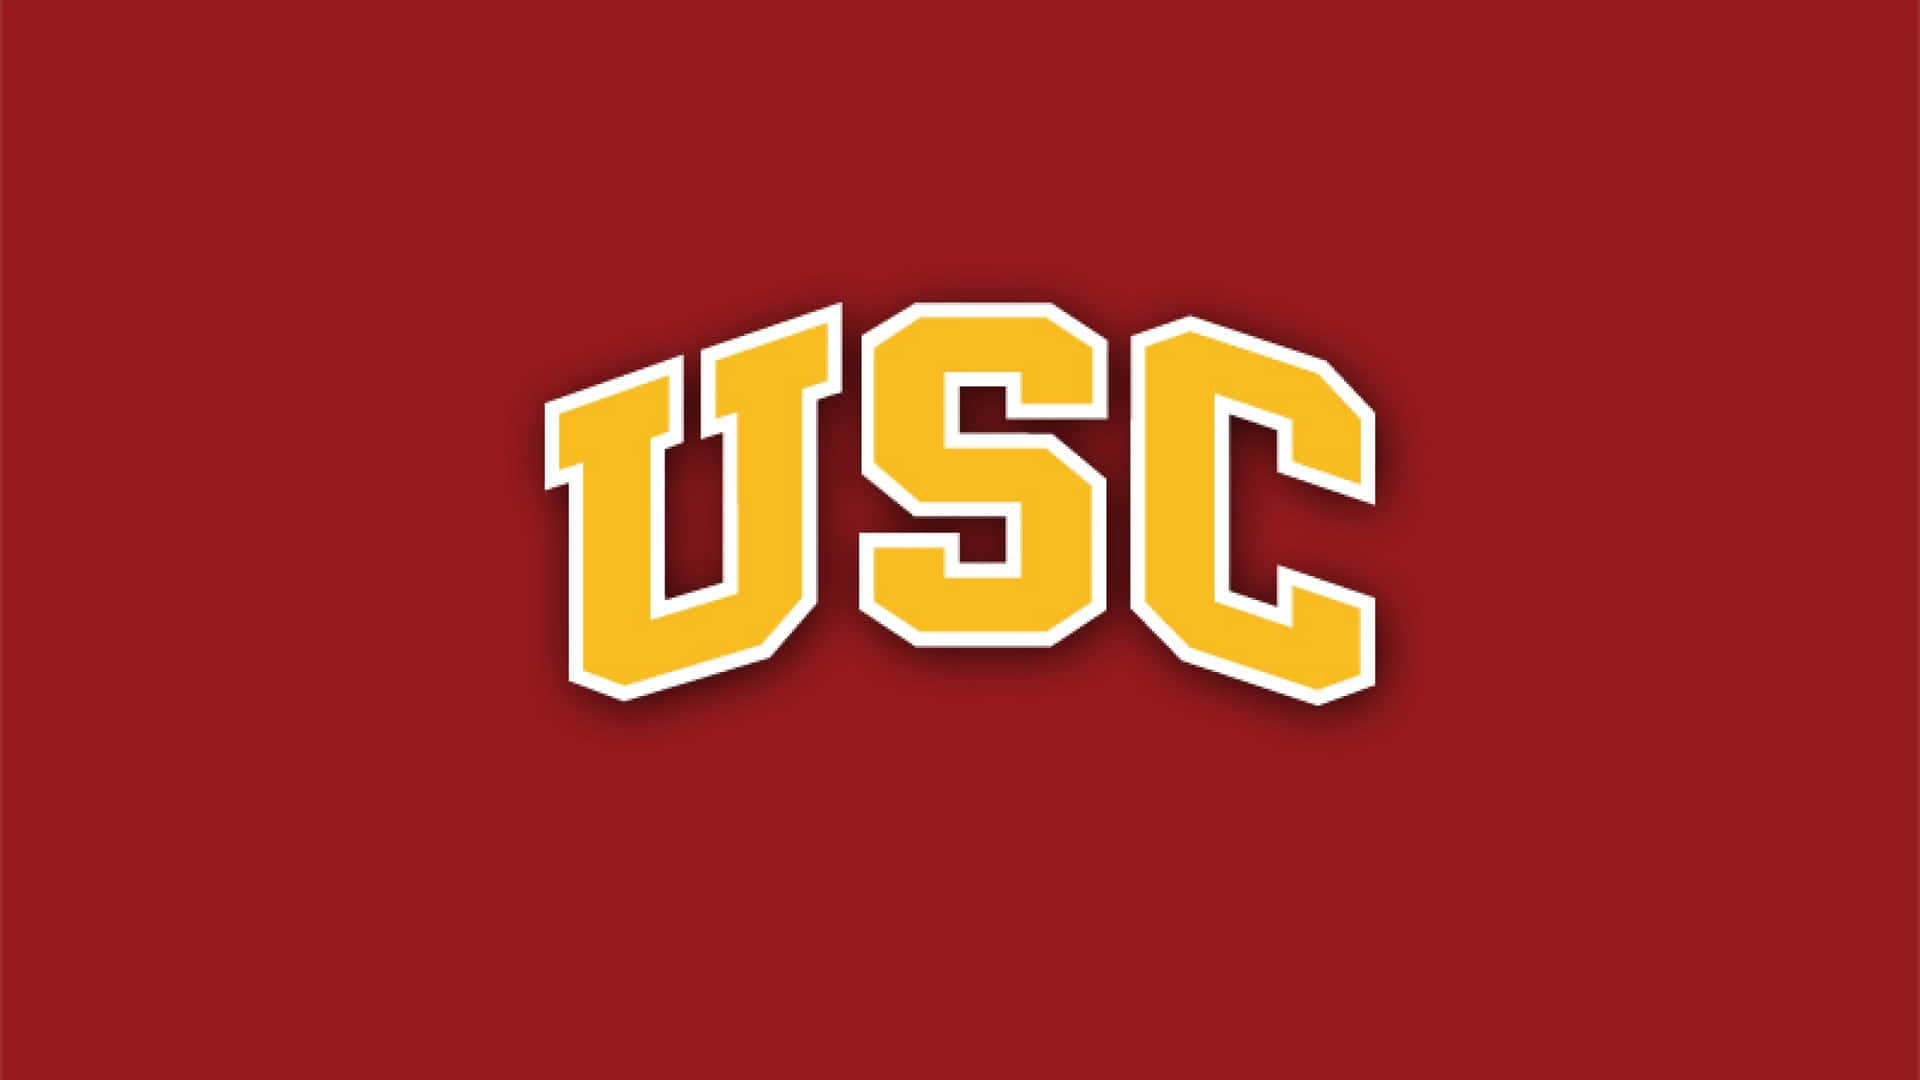 Usc Logo On A Red Background Background